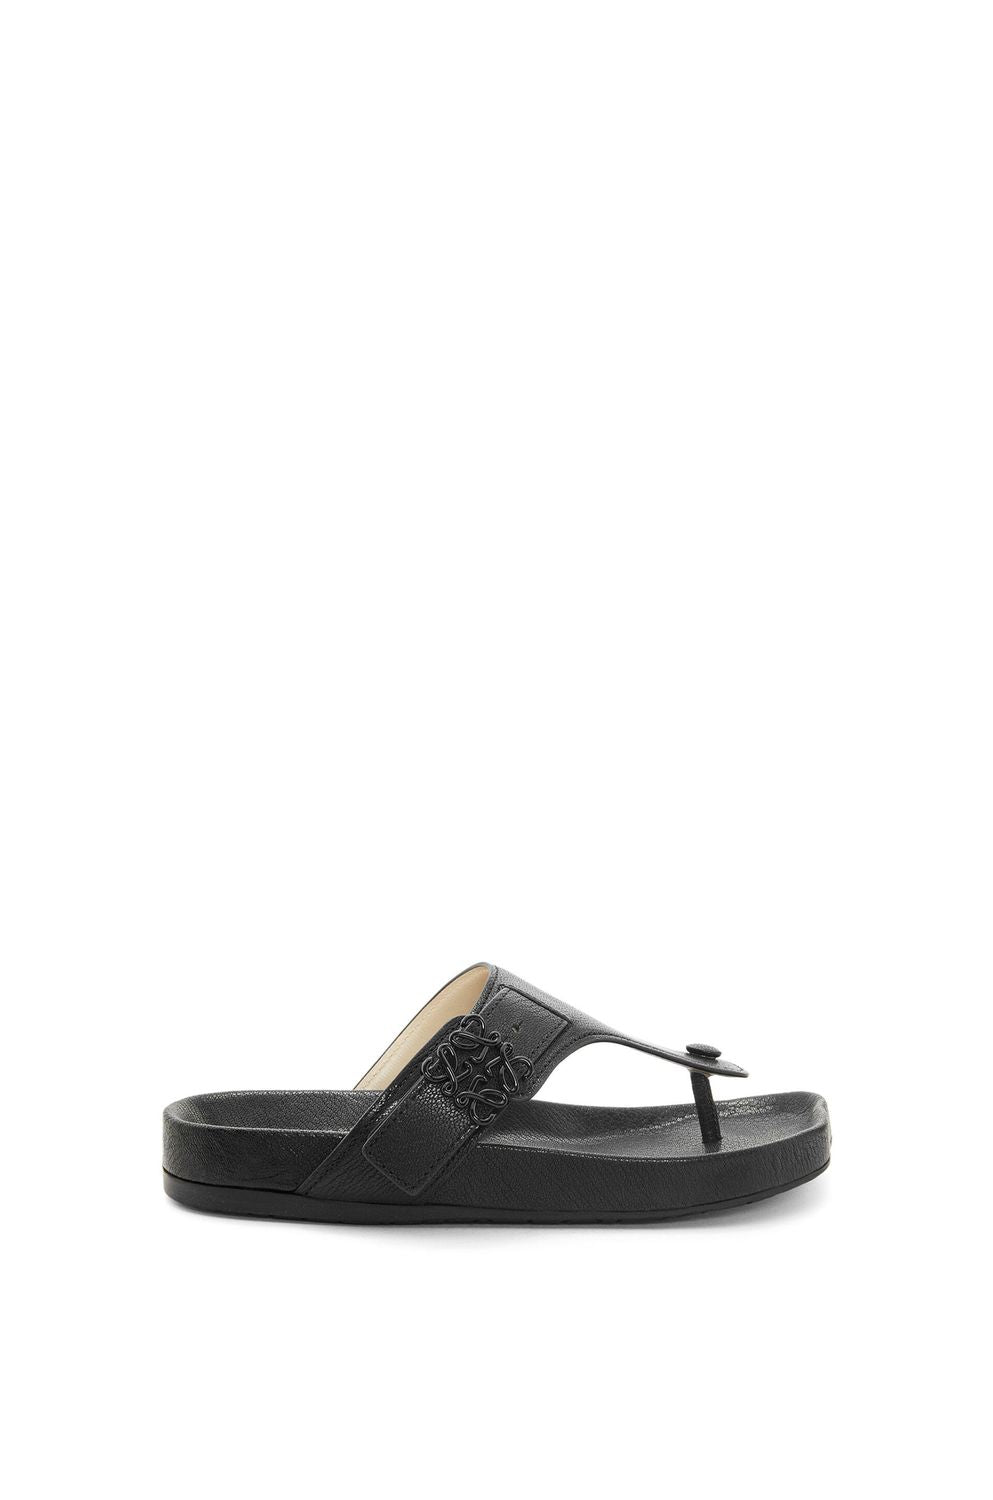 LOEWE Black Anagram Thong Sandals for Women - SS24 Collection